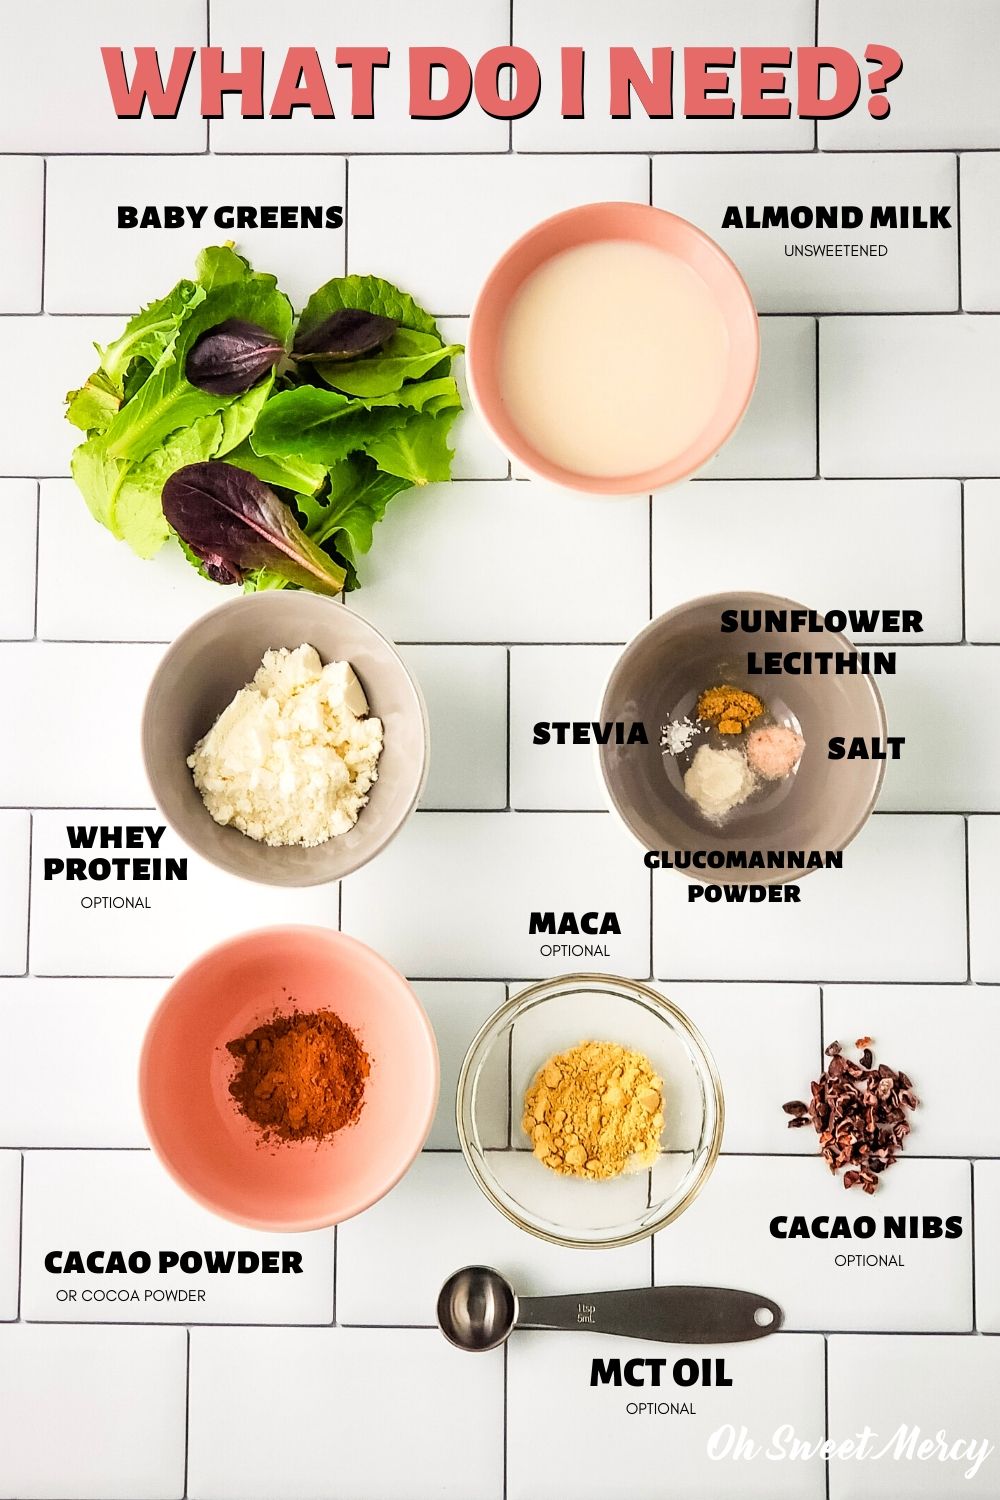 Chocolate Shake Ingredients: baby greens, unsweetened almond milk, cacao powder, whey protein powder, stevia, sunflower lecithin, salt, glucomannan powder, maca, cacao nibs (some ingredients are optional)